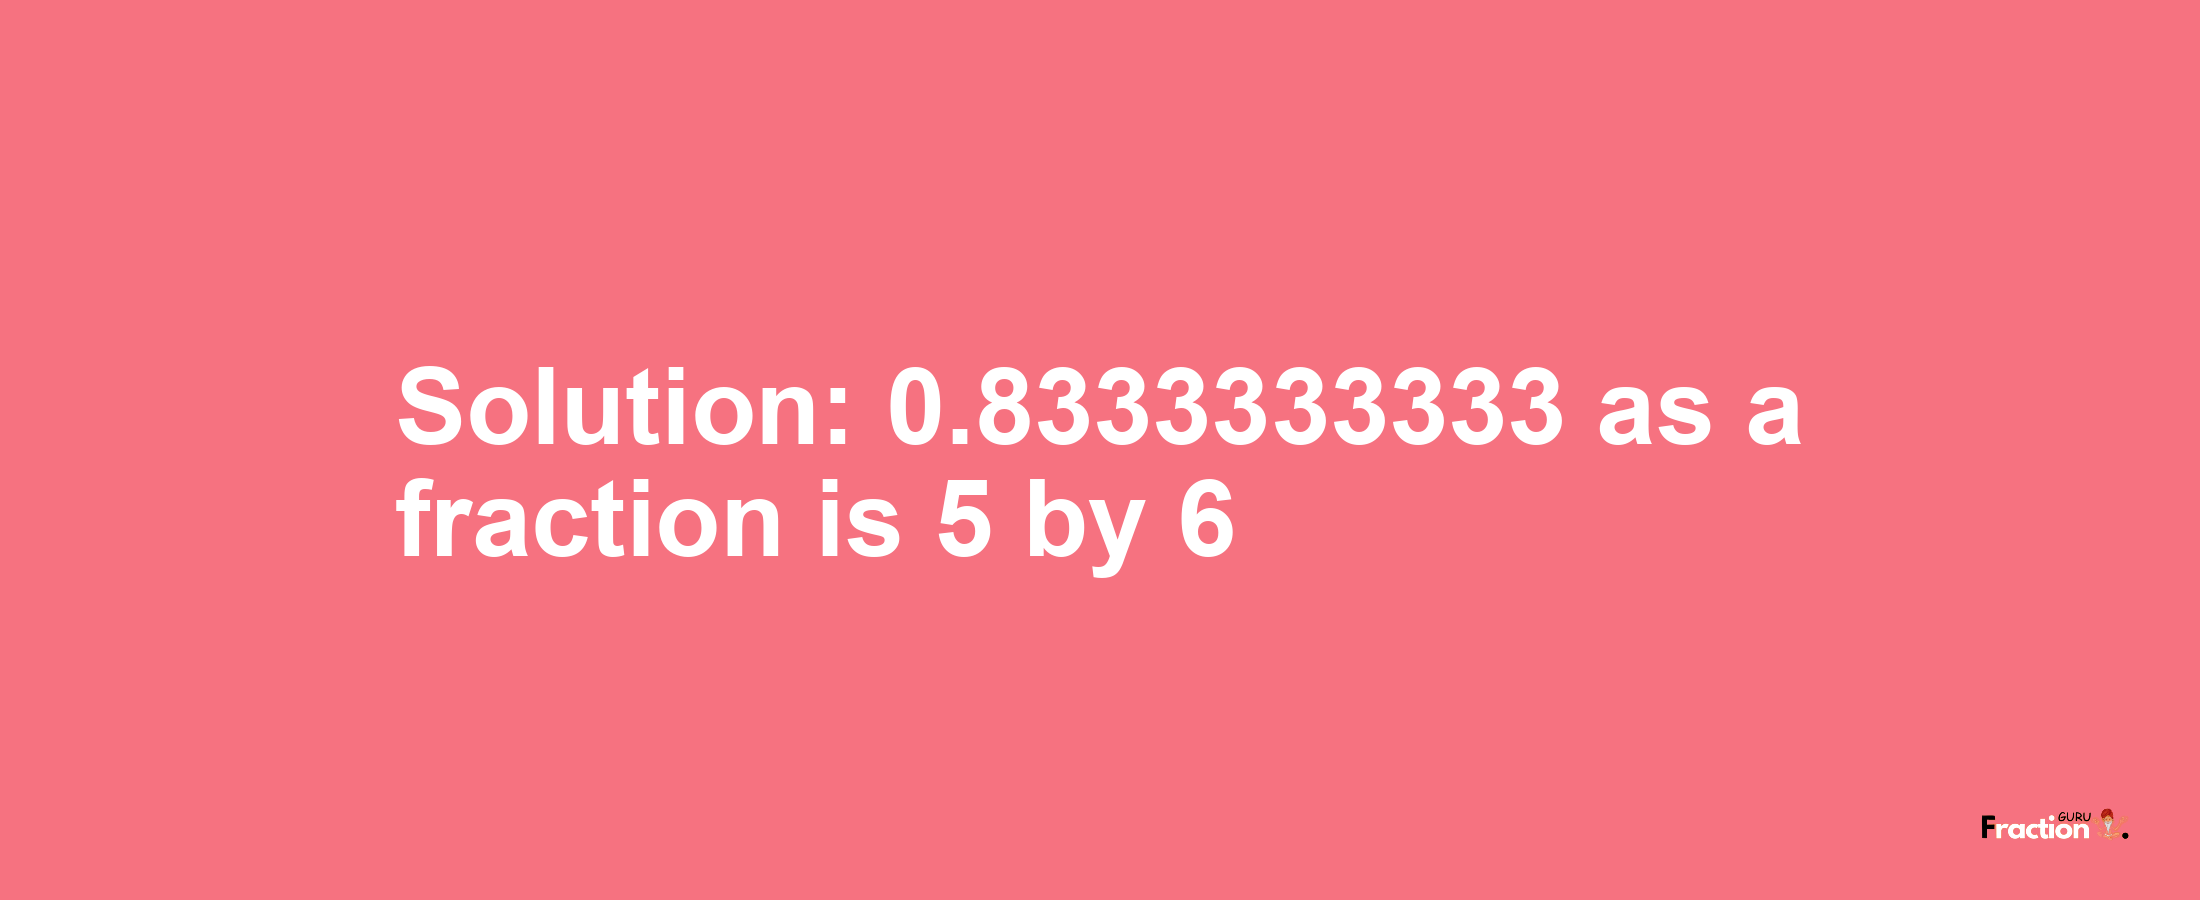 Solution:0.8333333333 as a fraction is 5/6